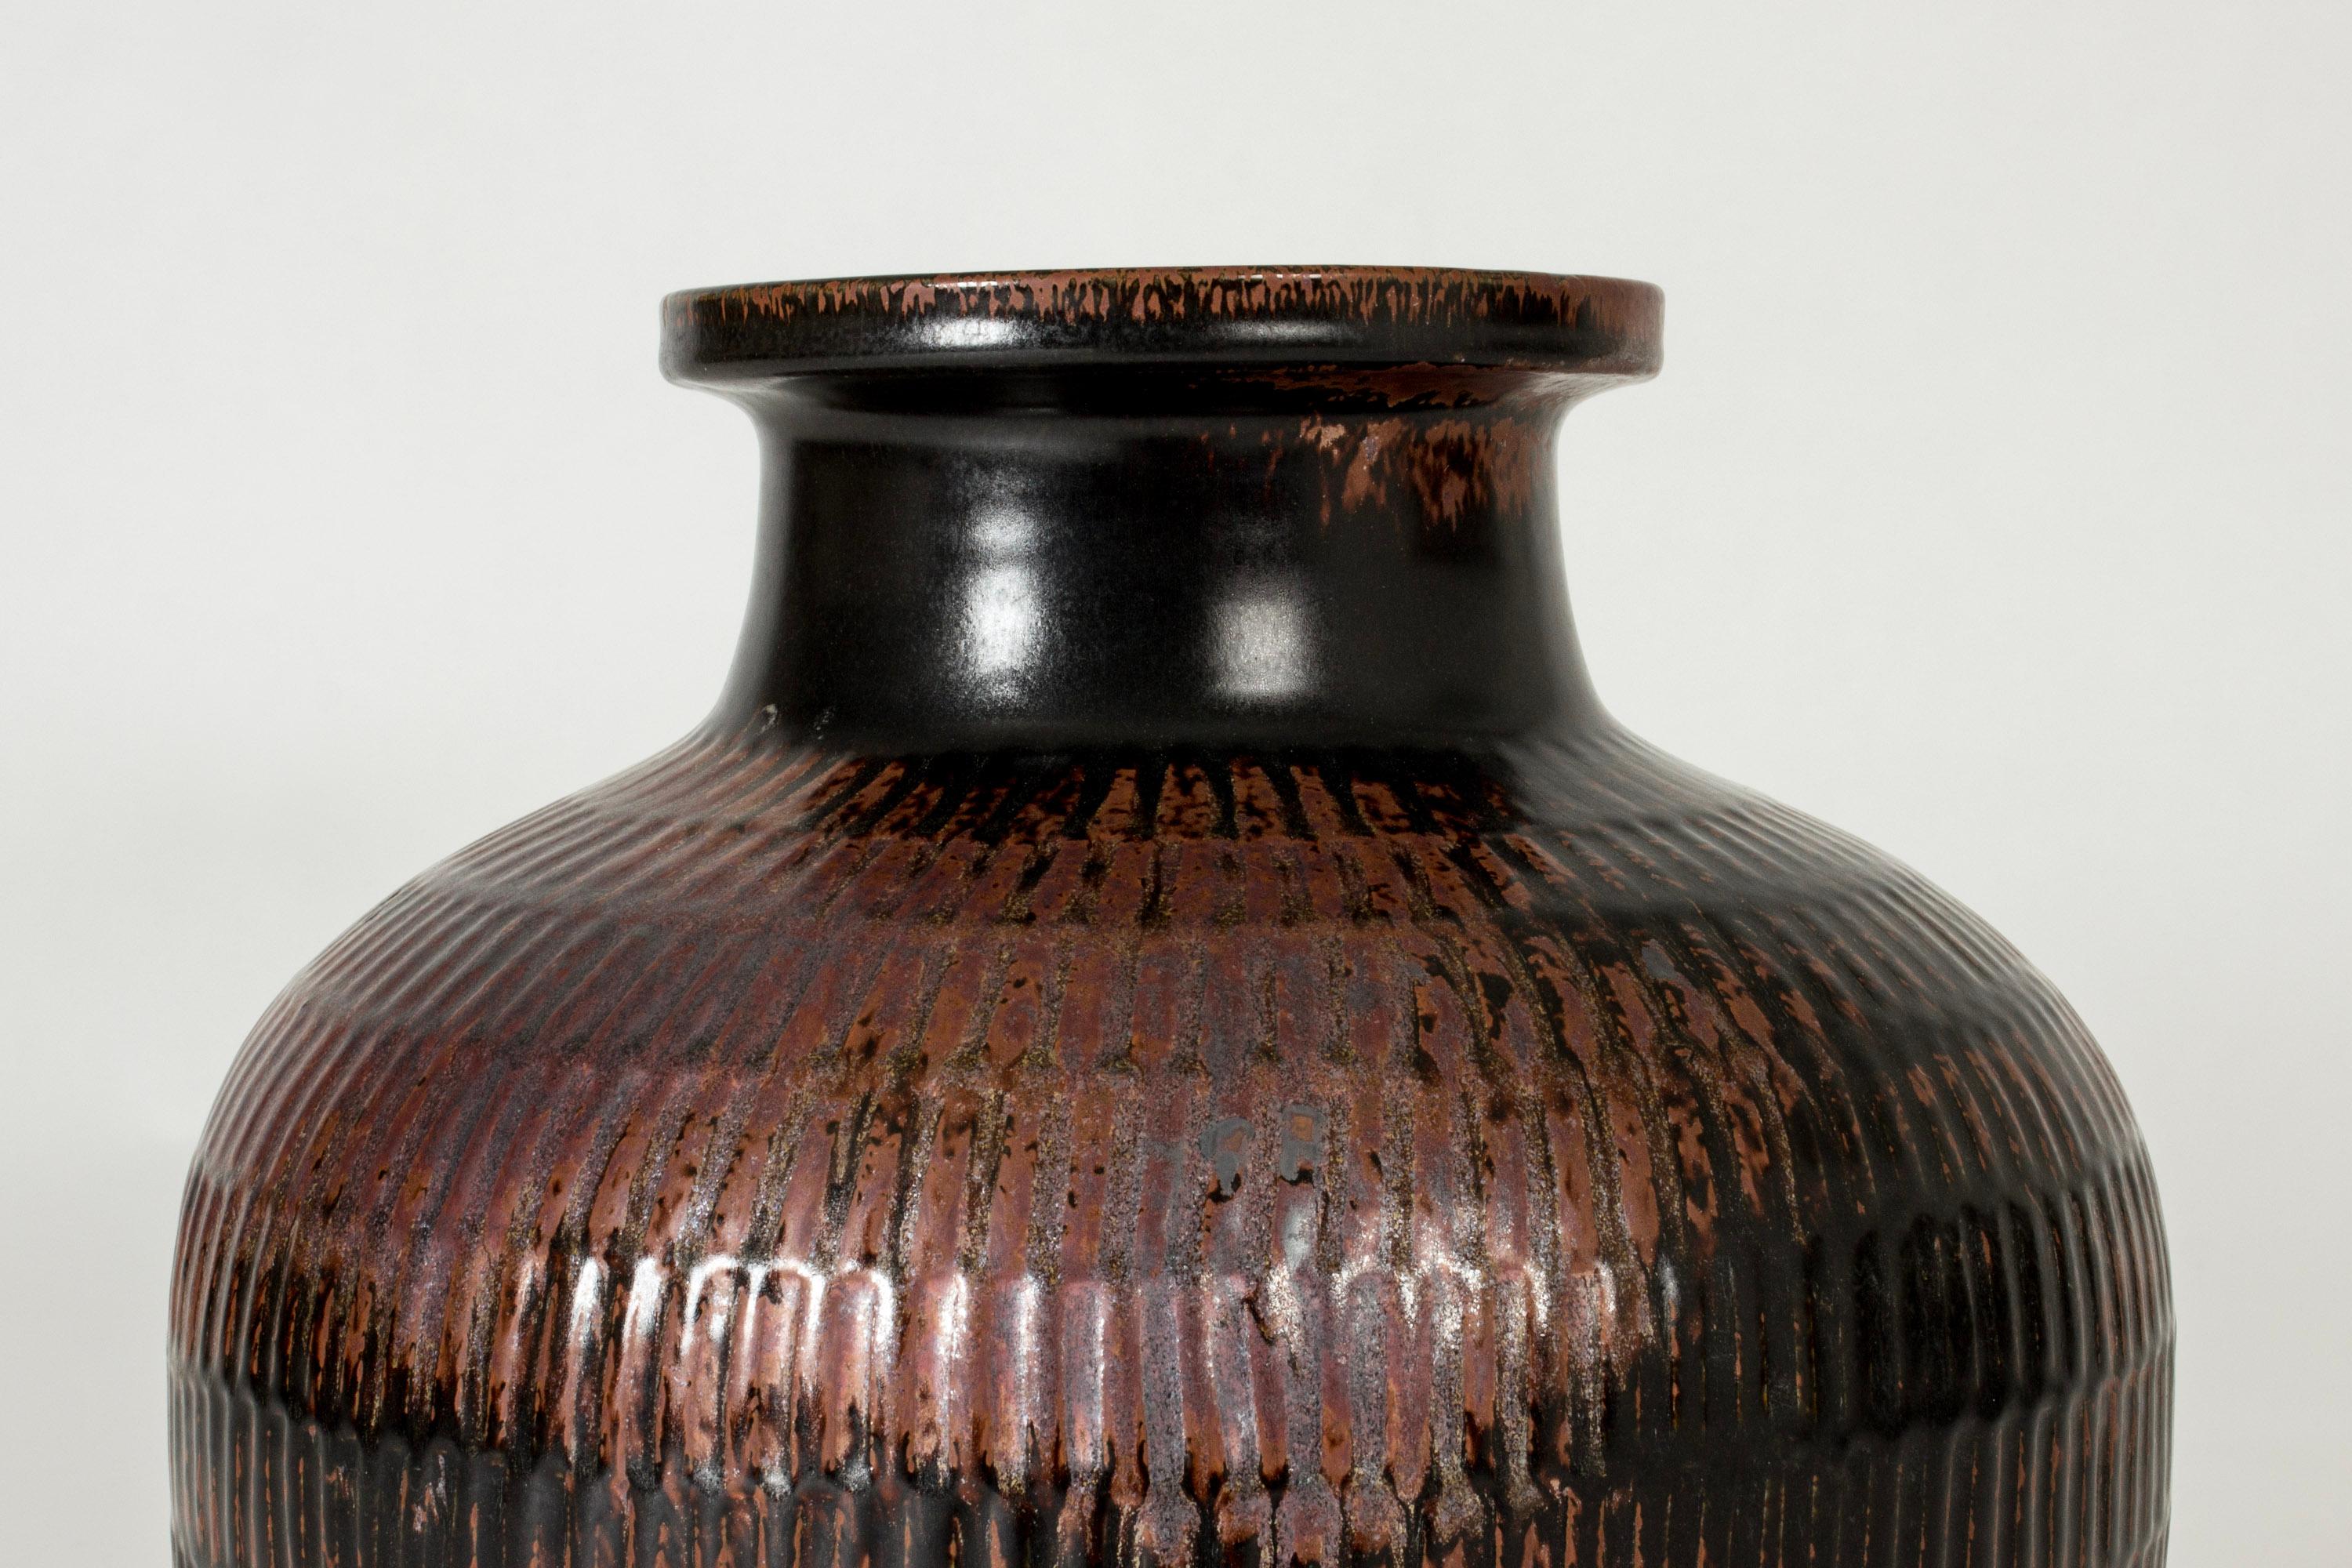 Stoneware floor vase by Stig Lindberg, in a plump form and imposing size. Graphic striped pattern, rich brown tenmoku glaze.